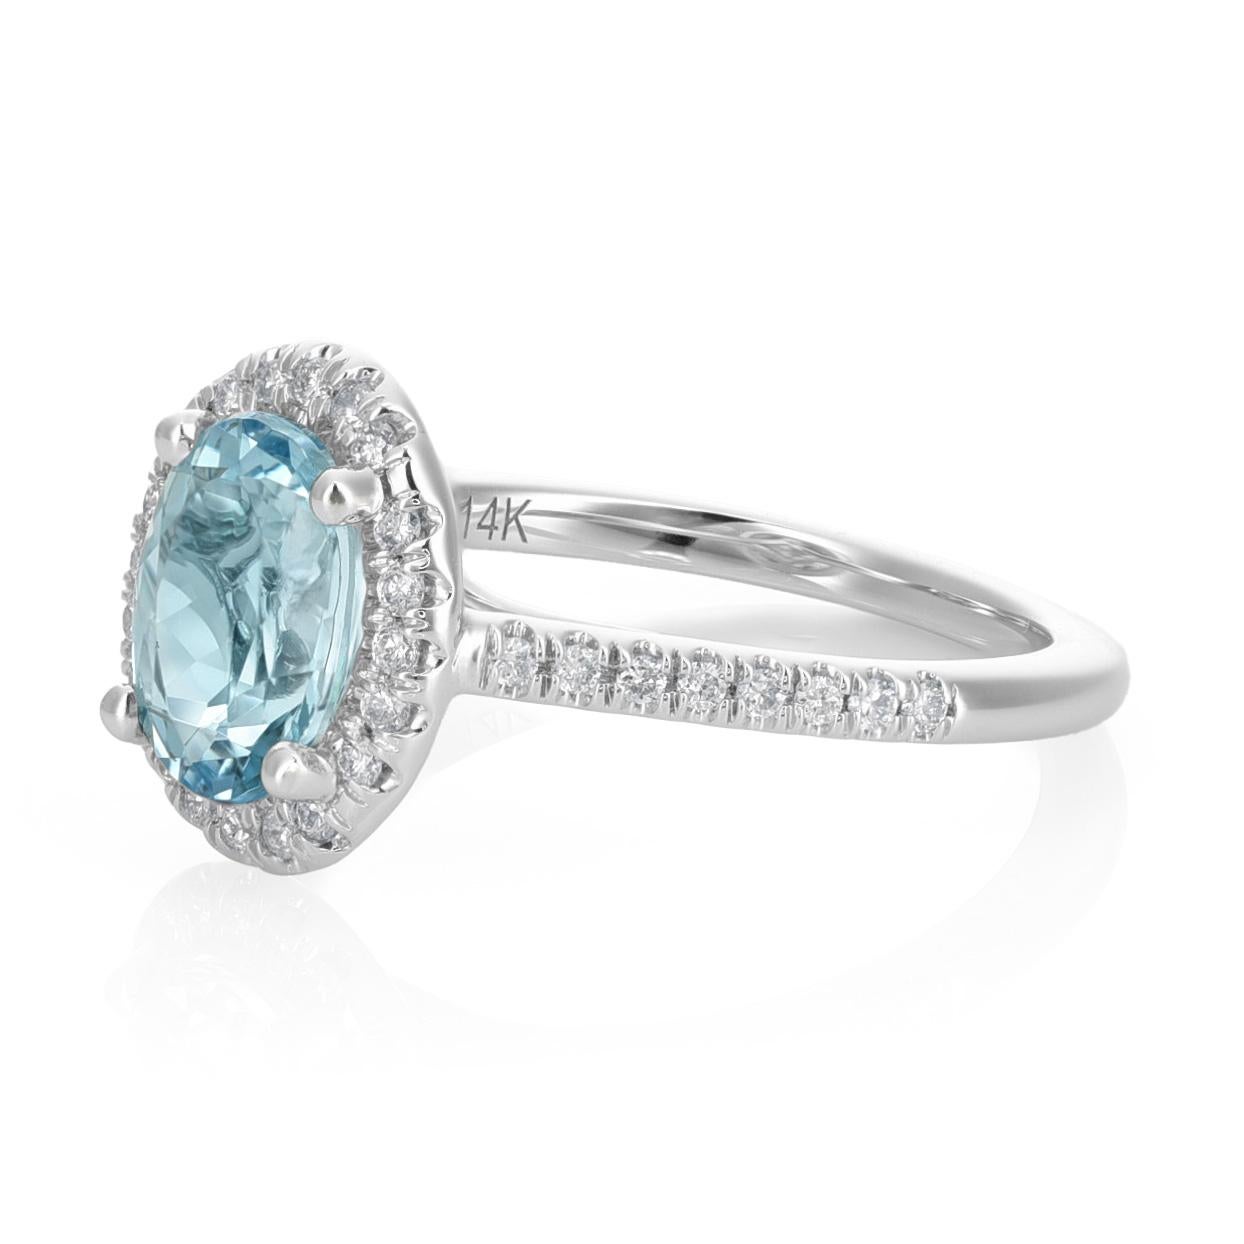 Adorn yourself with sophistication with this exquisite jewelry piece. A natural Aquamarine, weighing 1.75 carats and fashioned in an alluring oval shape, takes center stage in a 14K White Gold setting. The delicate blue hue of the Aquamarine,